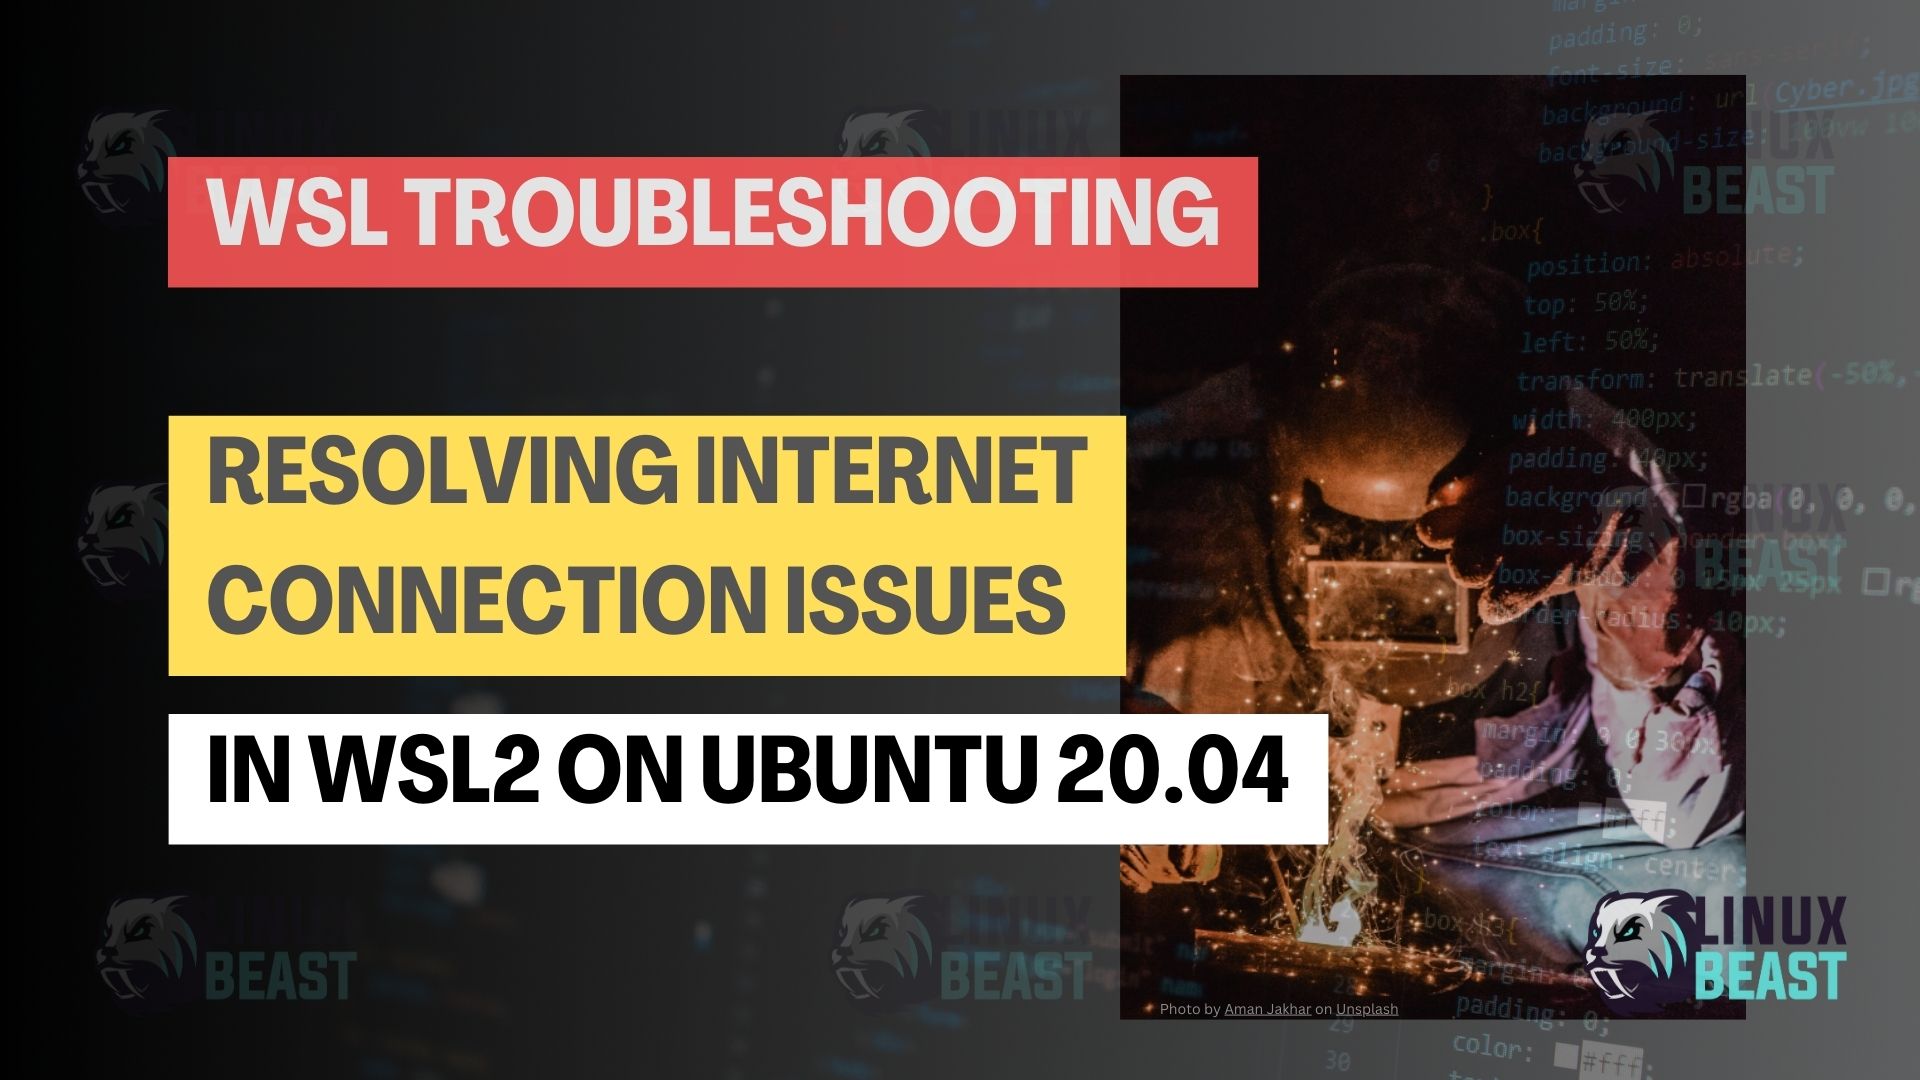 Resolving Internet Connection Issues in WSL2 on Ubuntu 20.04